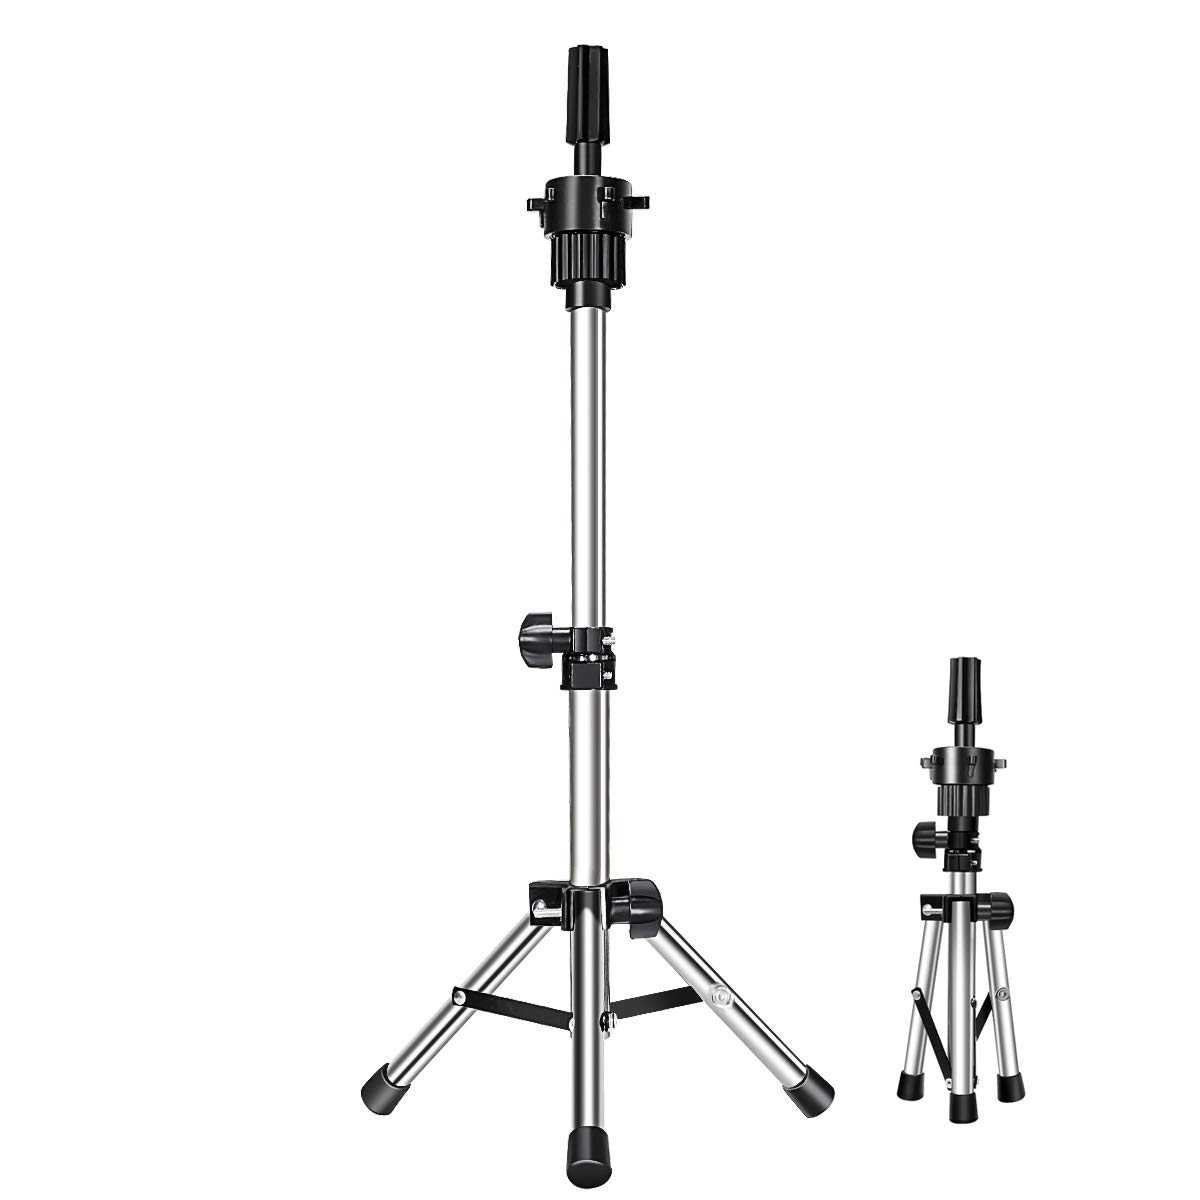 Mini Mannequin Head Stand,Dansee Wig Stand Tripod Adjustable (14.5-21.8  inch) for Mannequin Heads Training